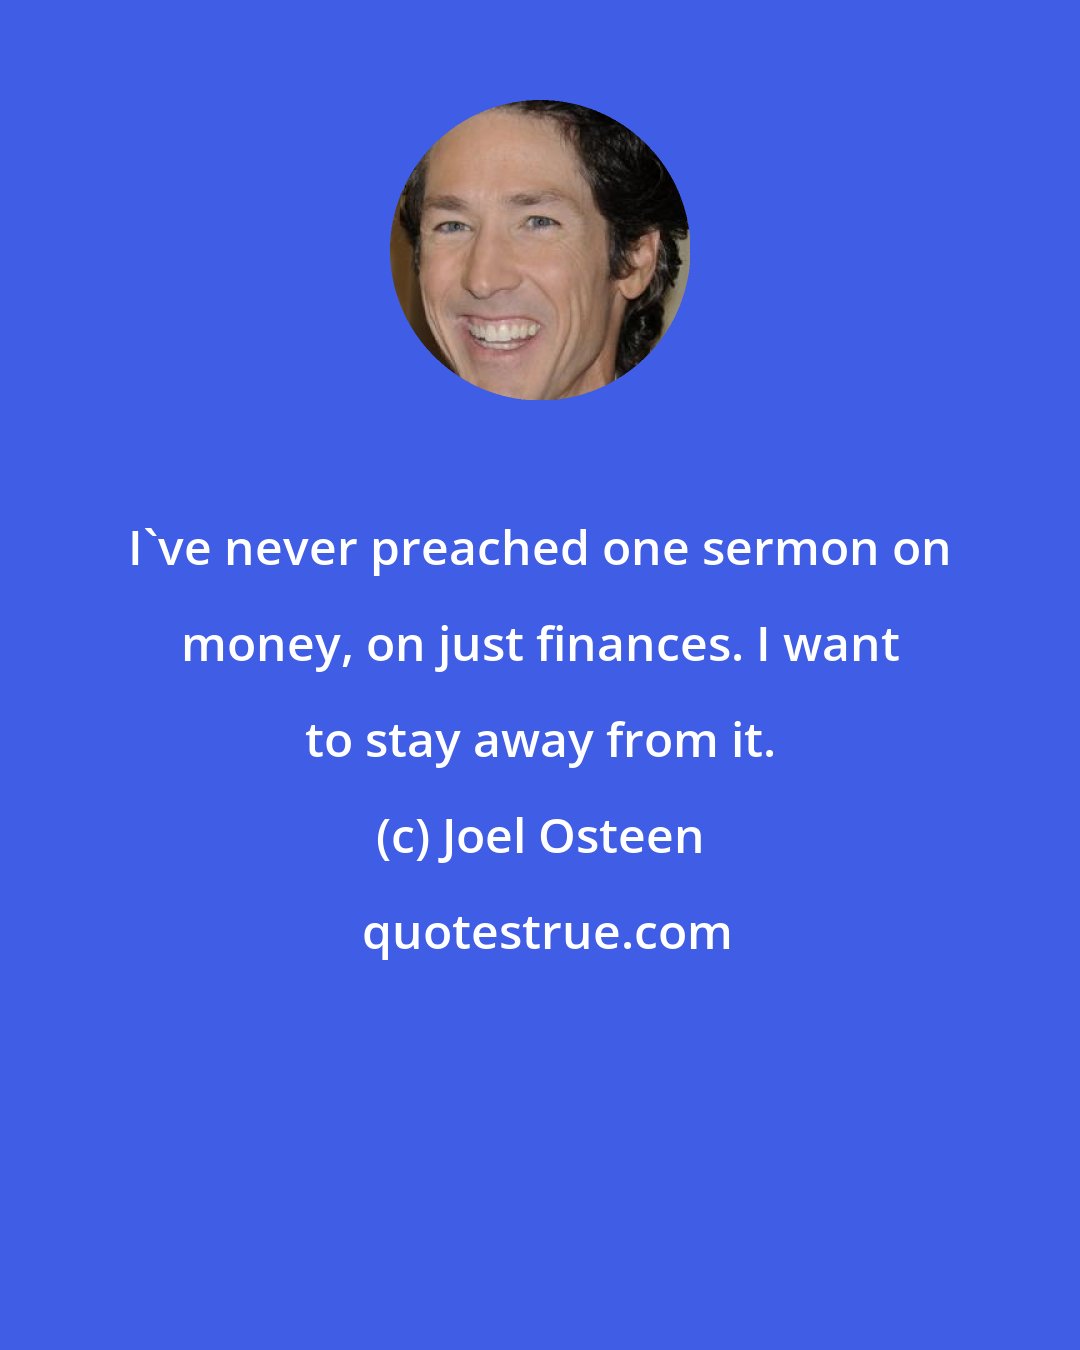 Joel Osteen: I've never preached one sermon on money, on just finances. I want to stay away from it.